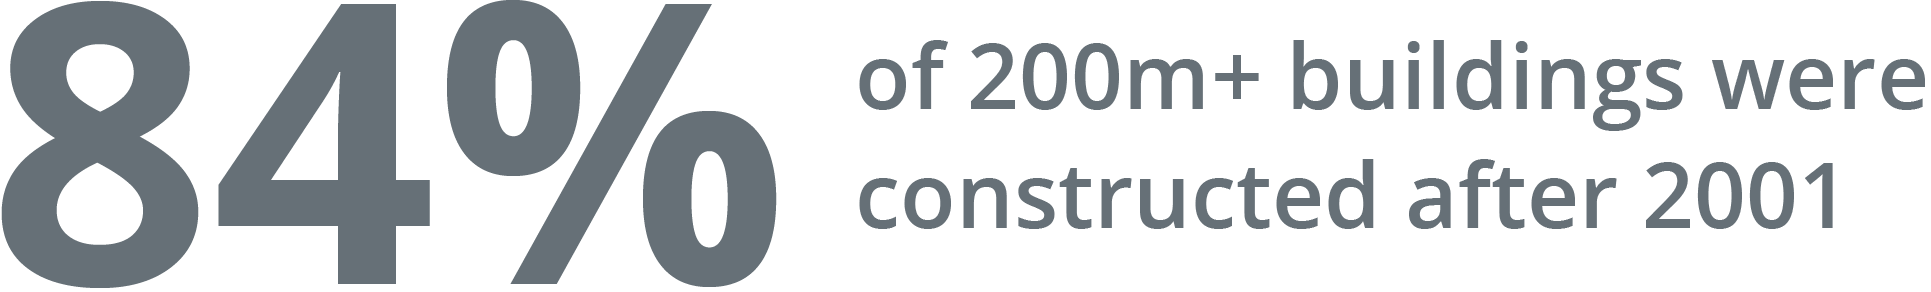 84% of 200 m+ buildings were constructed after 2001.